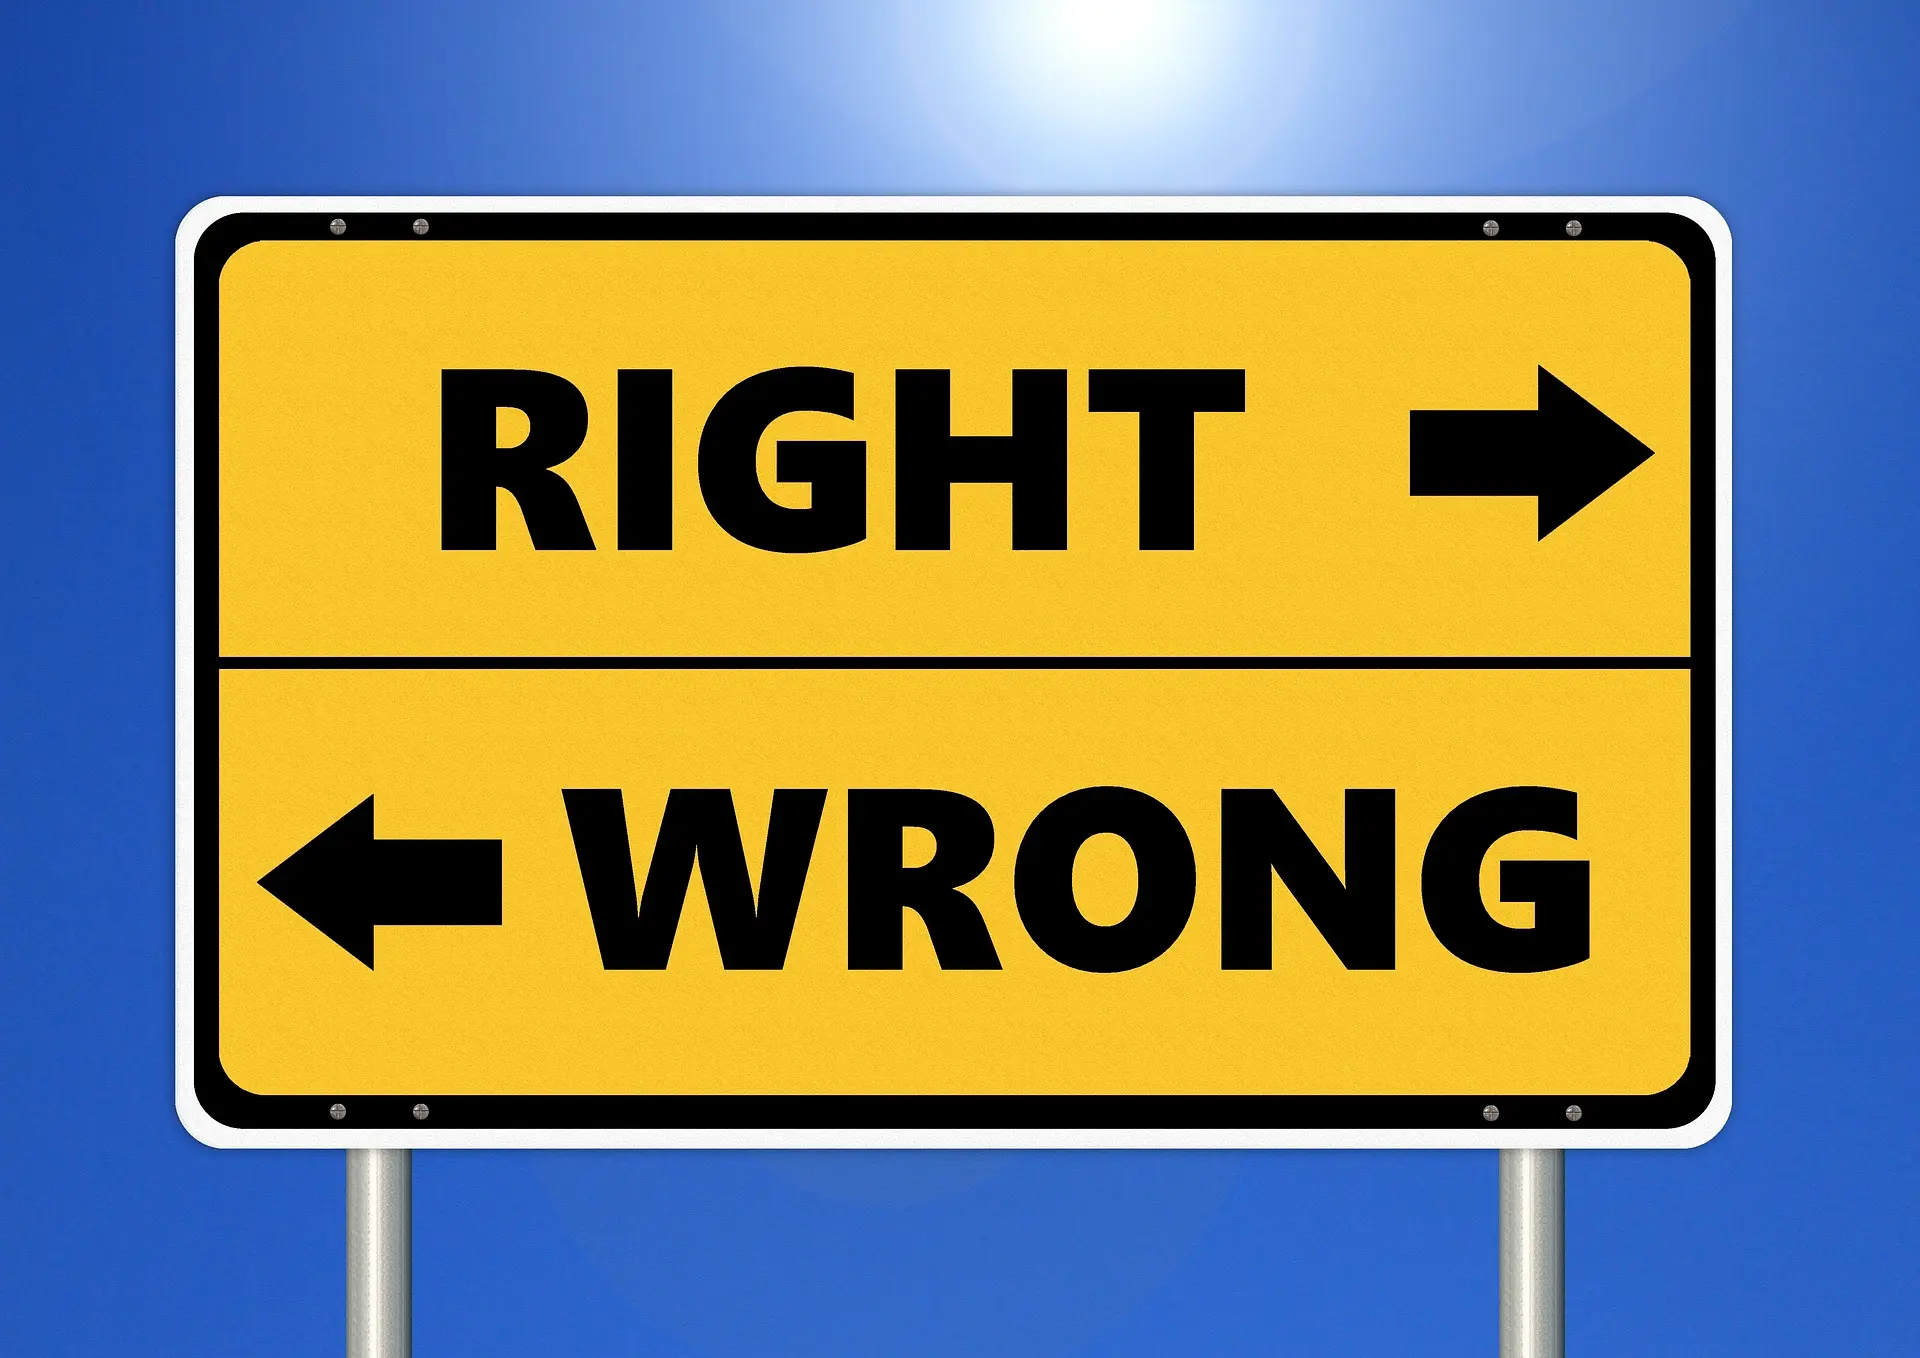 Road sign indicating right and wrong directions, relating to ethical business practices.